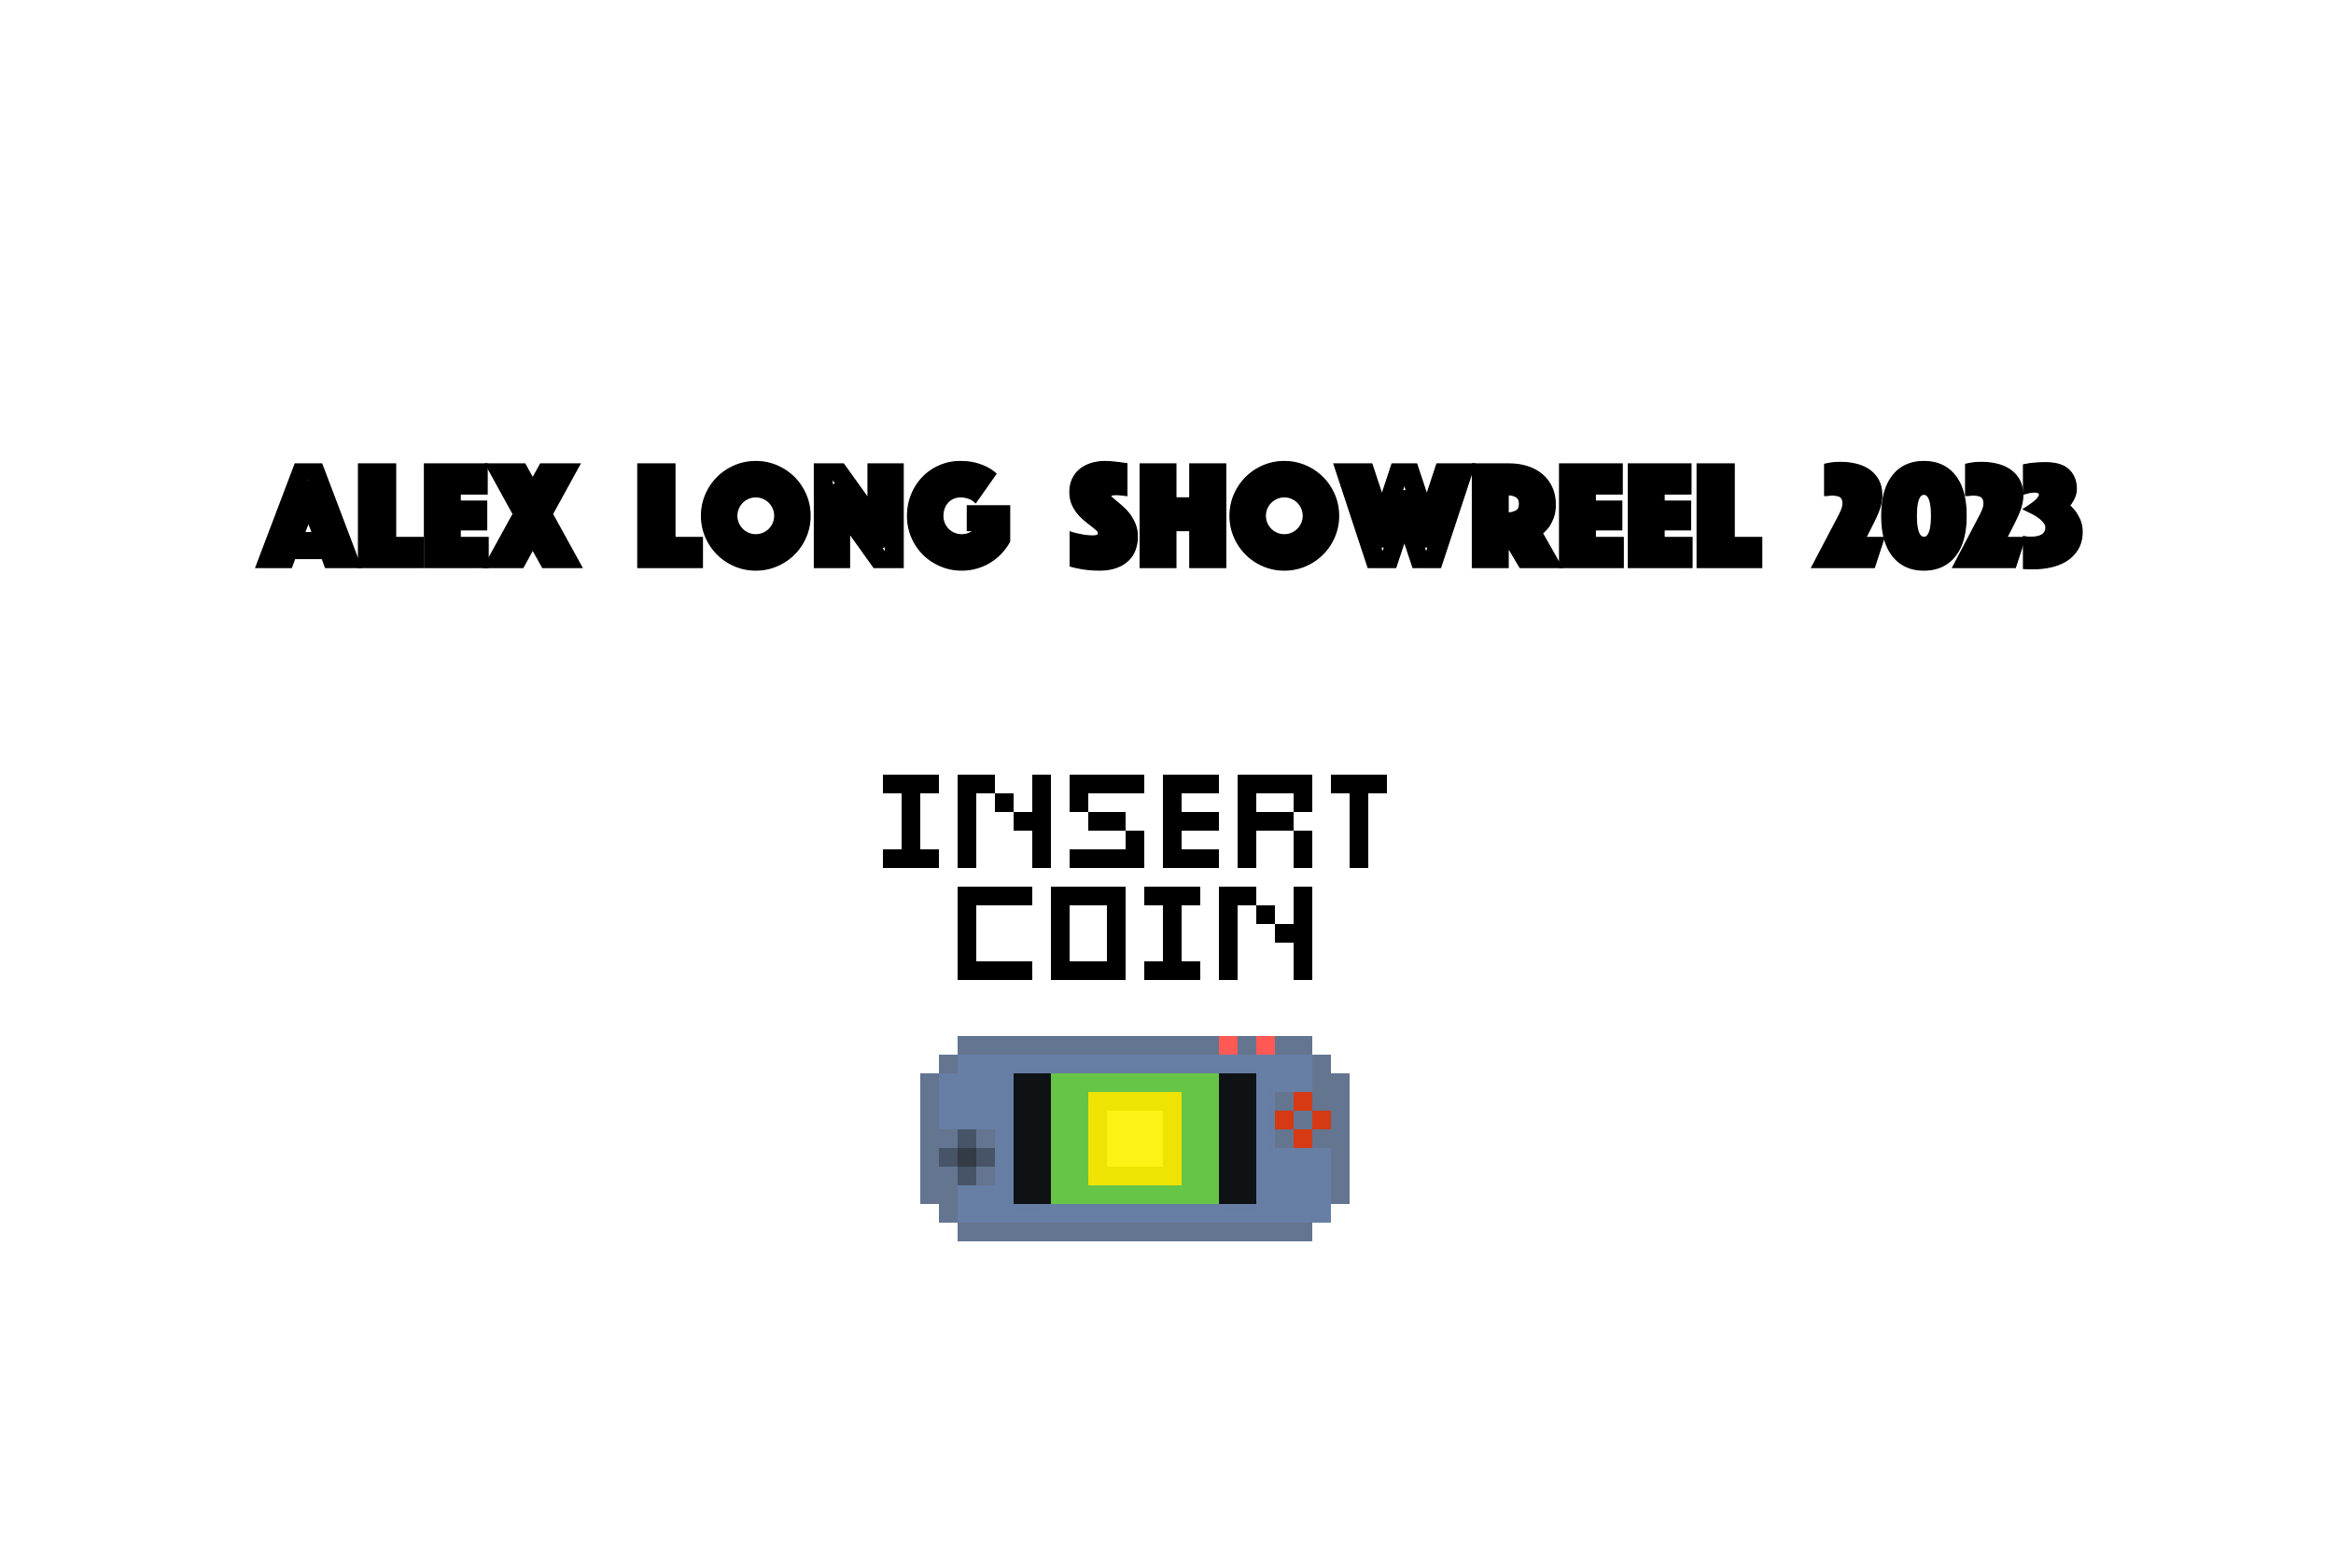 Animation showreel by Alex Long showing various characters, parallax, pixel, and character animations.